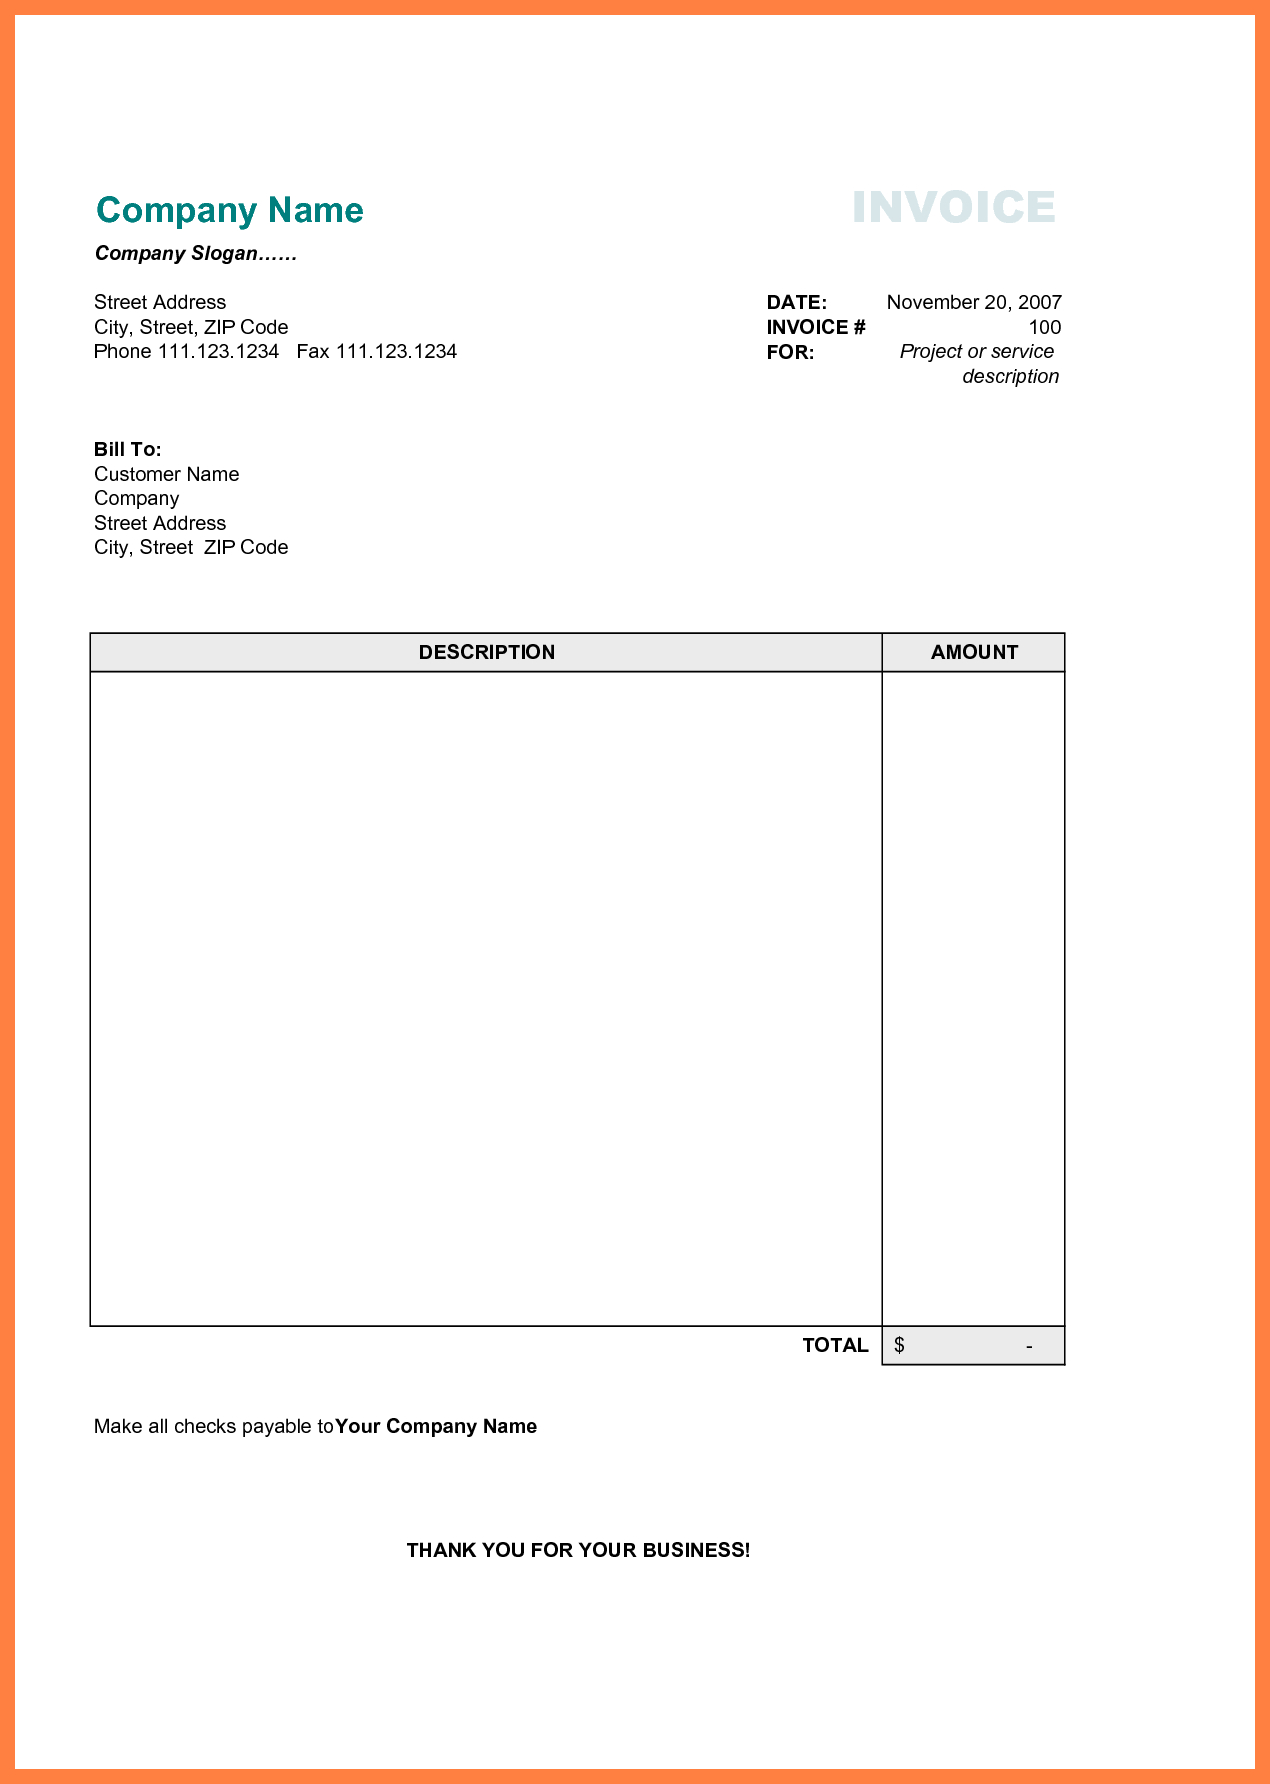 Free Printable Business Invoice Template - Invoice Format In Excel - Free Printable Work Invoices